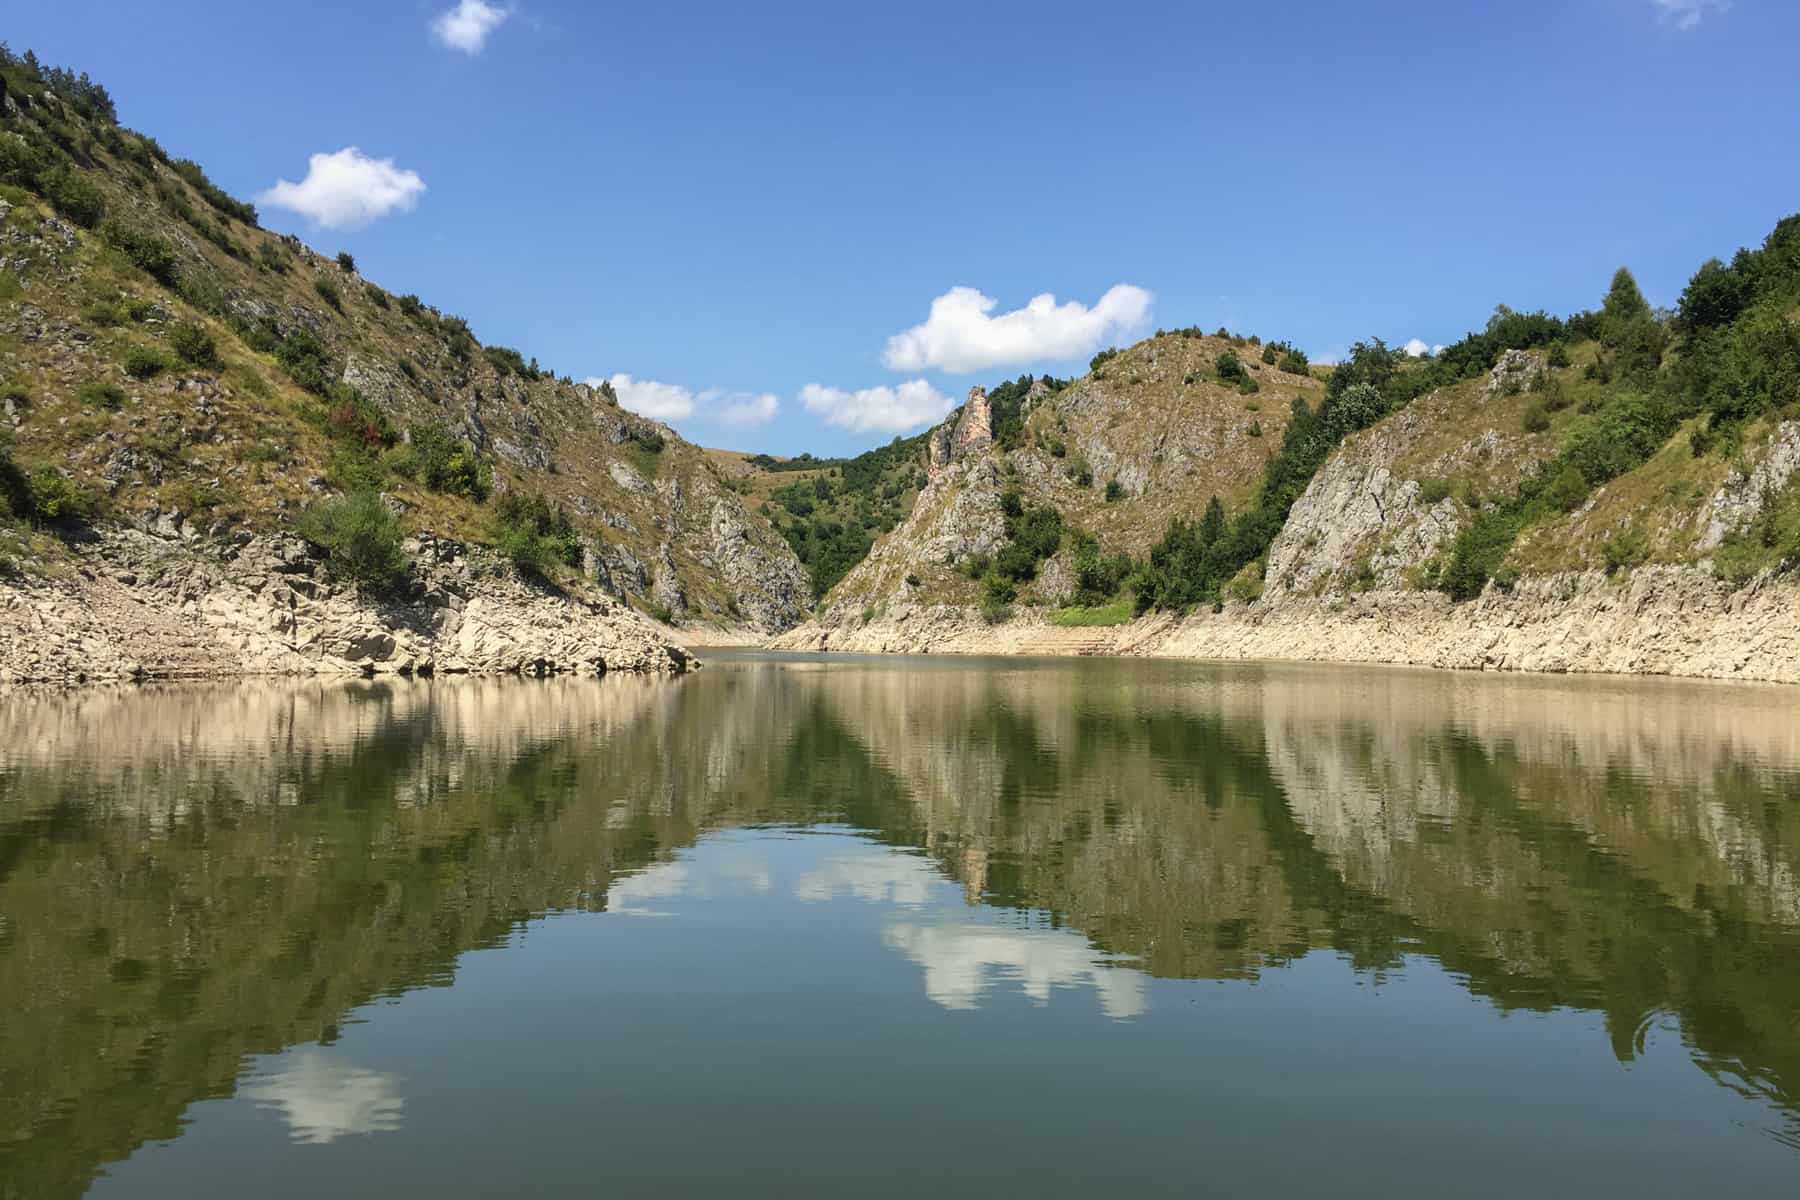 The wide of the Uvac Gorge in Serbia and the reflection of the cliffs and clouds in the water.